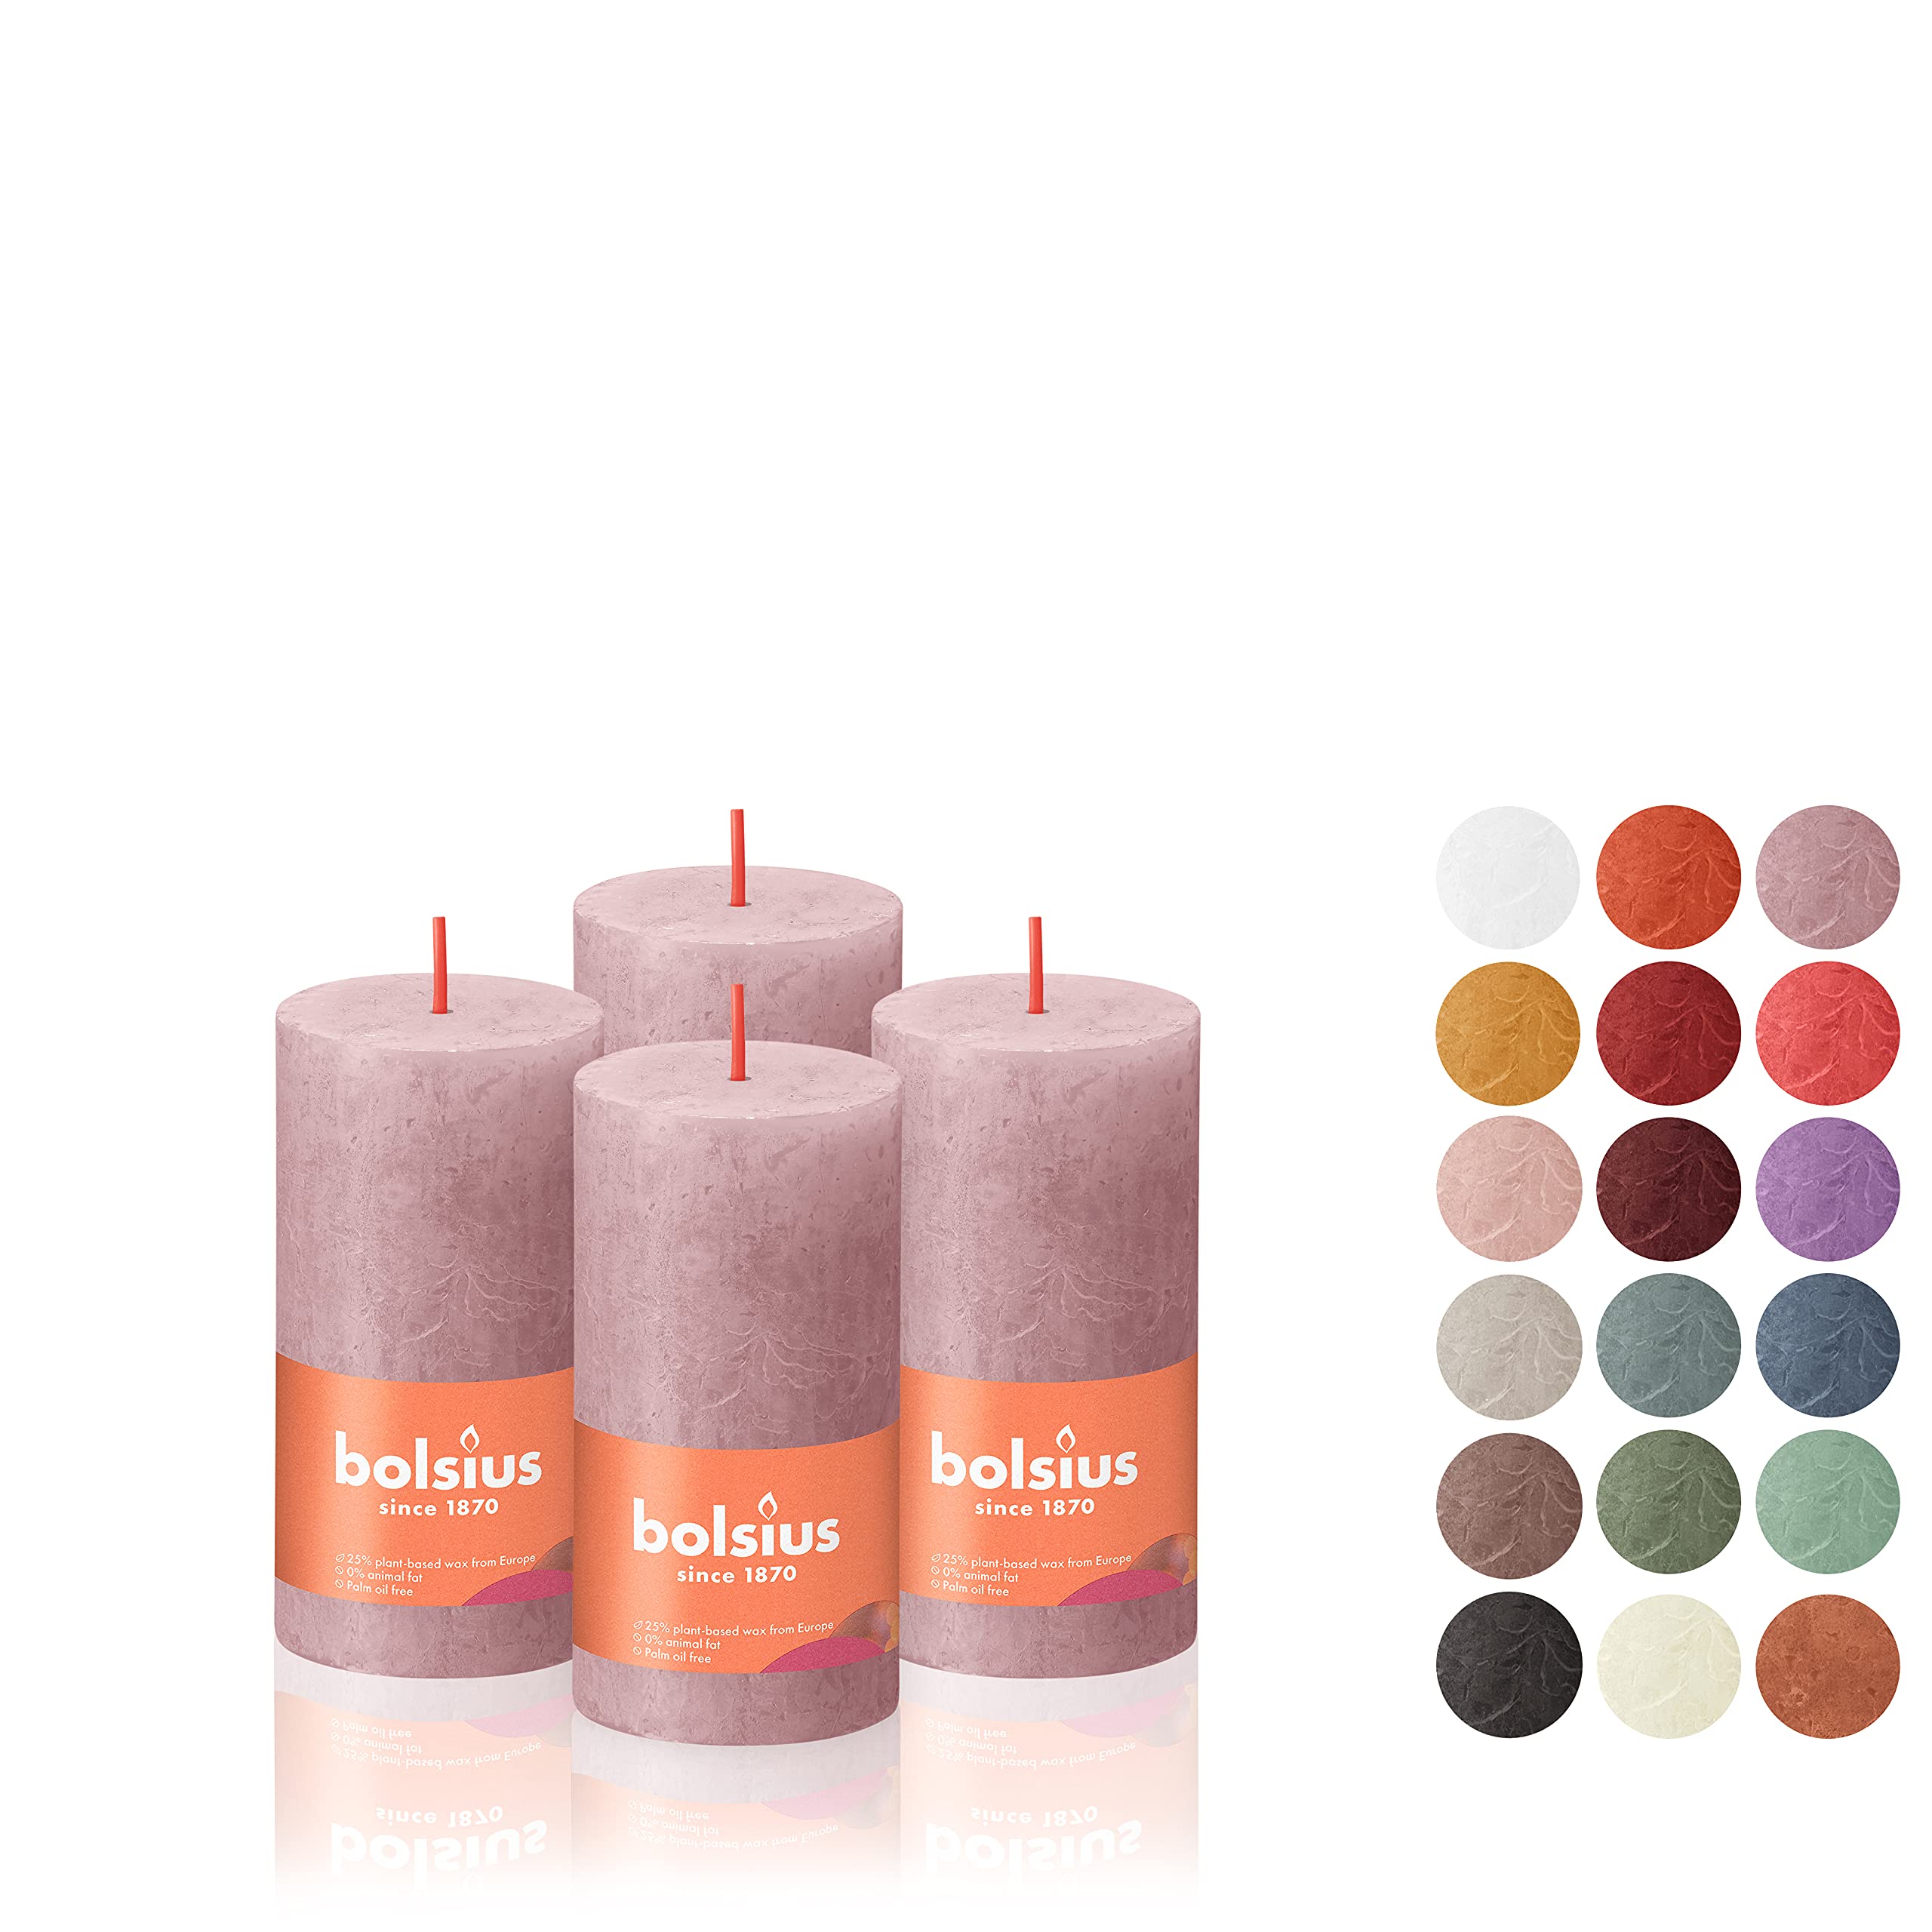 BOLSIUS 4 Pack Ash Rose Rustic Pillar Candles - 2 X 4 Inches - Premium European Quality - Includes Natural Plant-Based Wax - Unscented Dripless Smokeless 30 Hour Party D�cor and Wedding Candles  - Like New